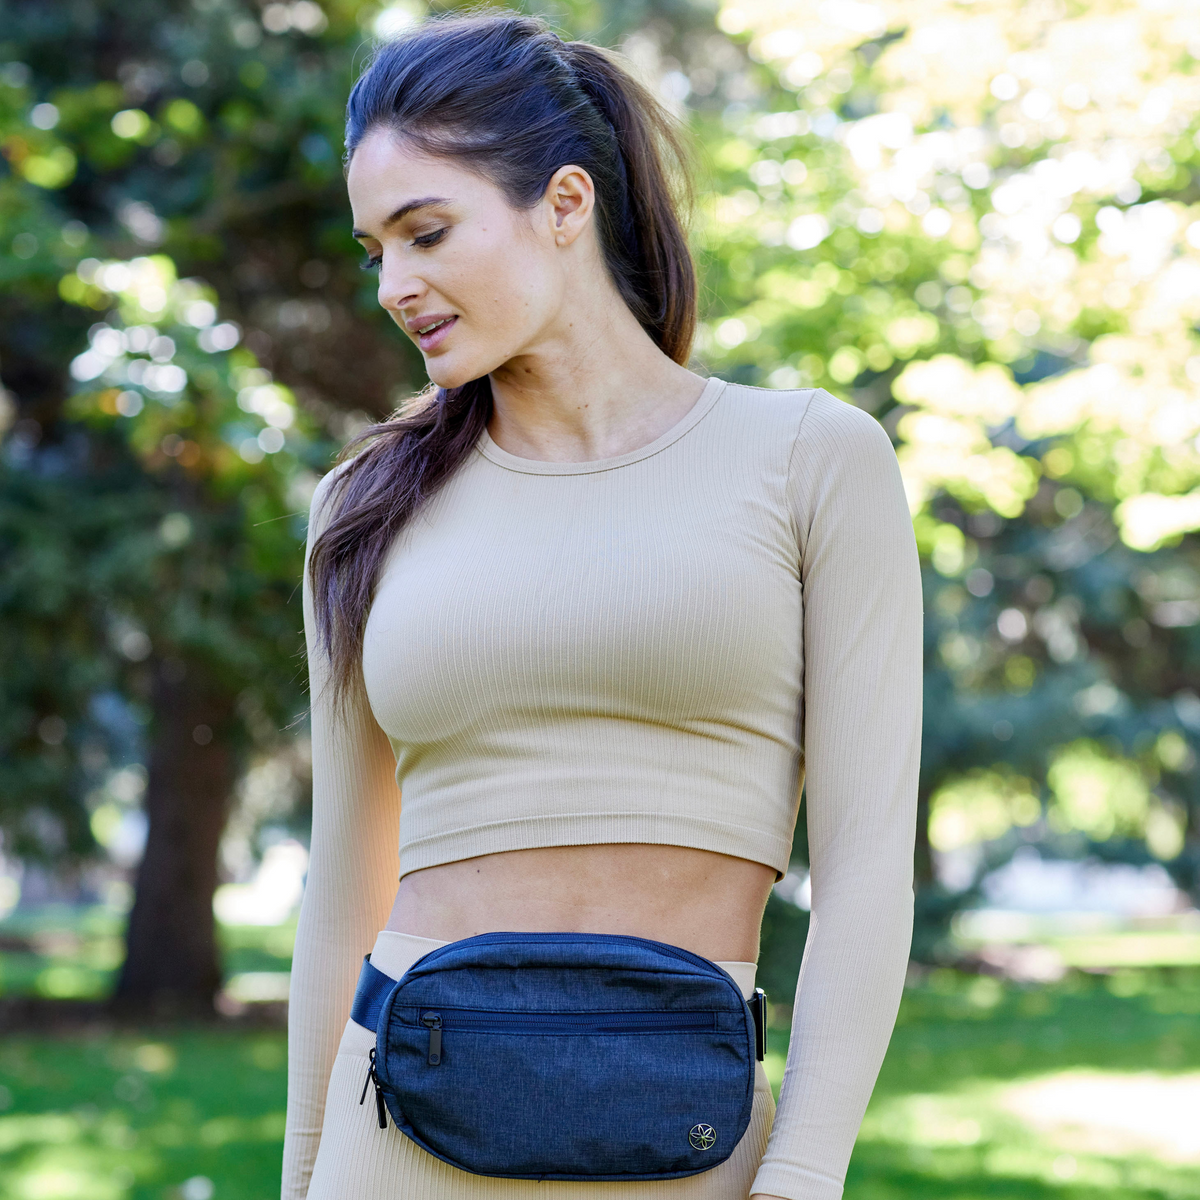 Woman with Get Moving Waist Pack around waist